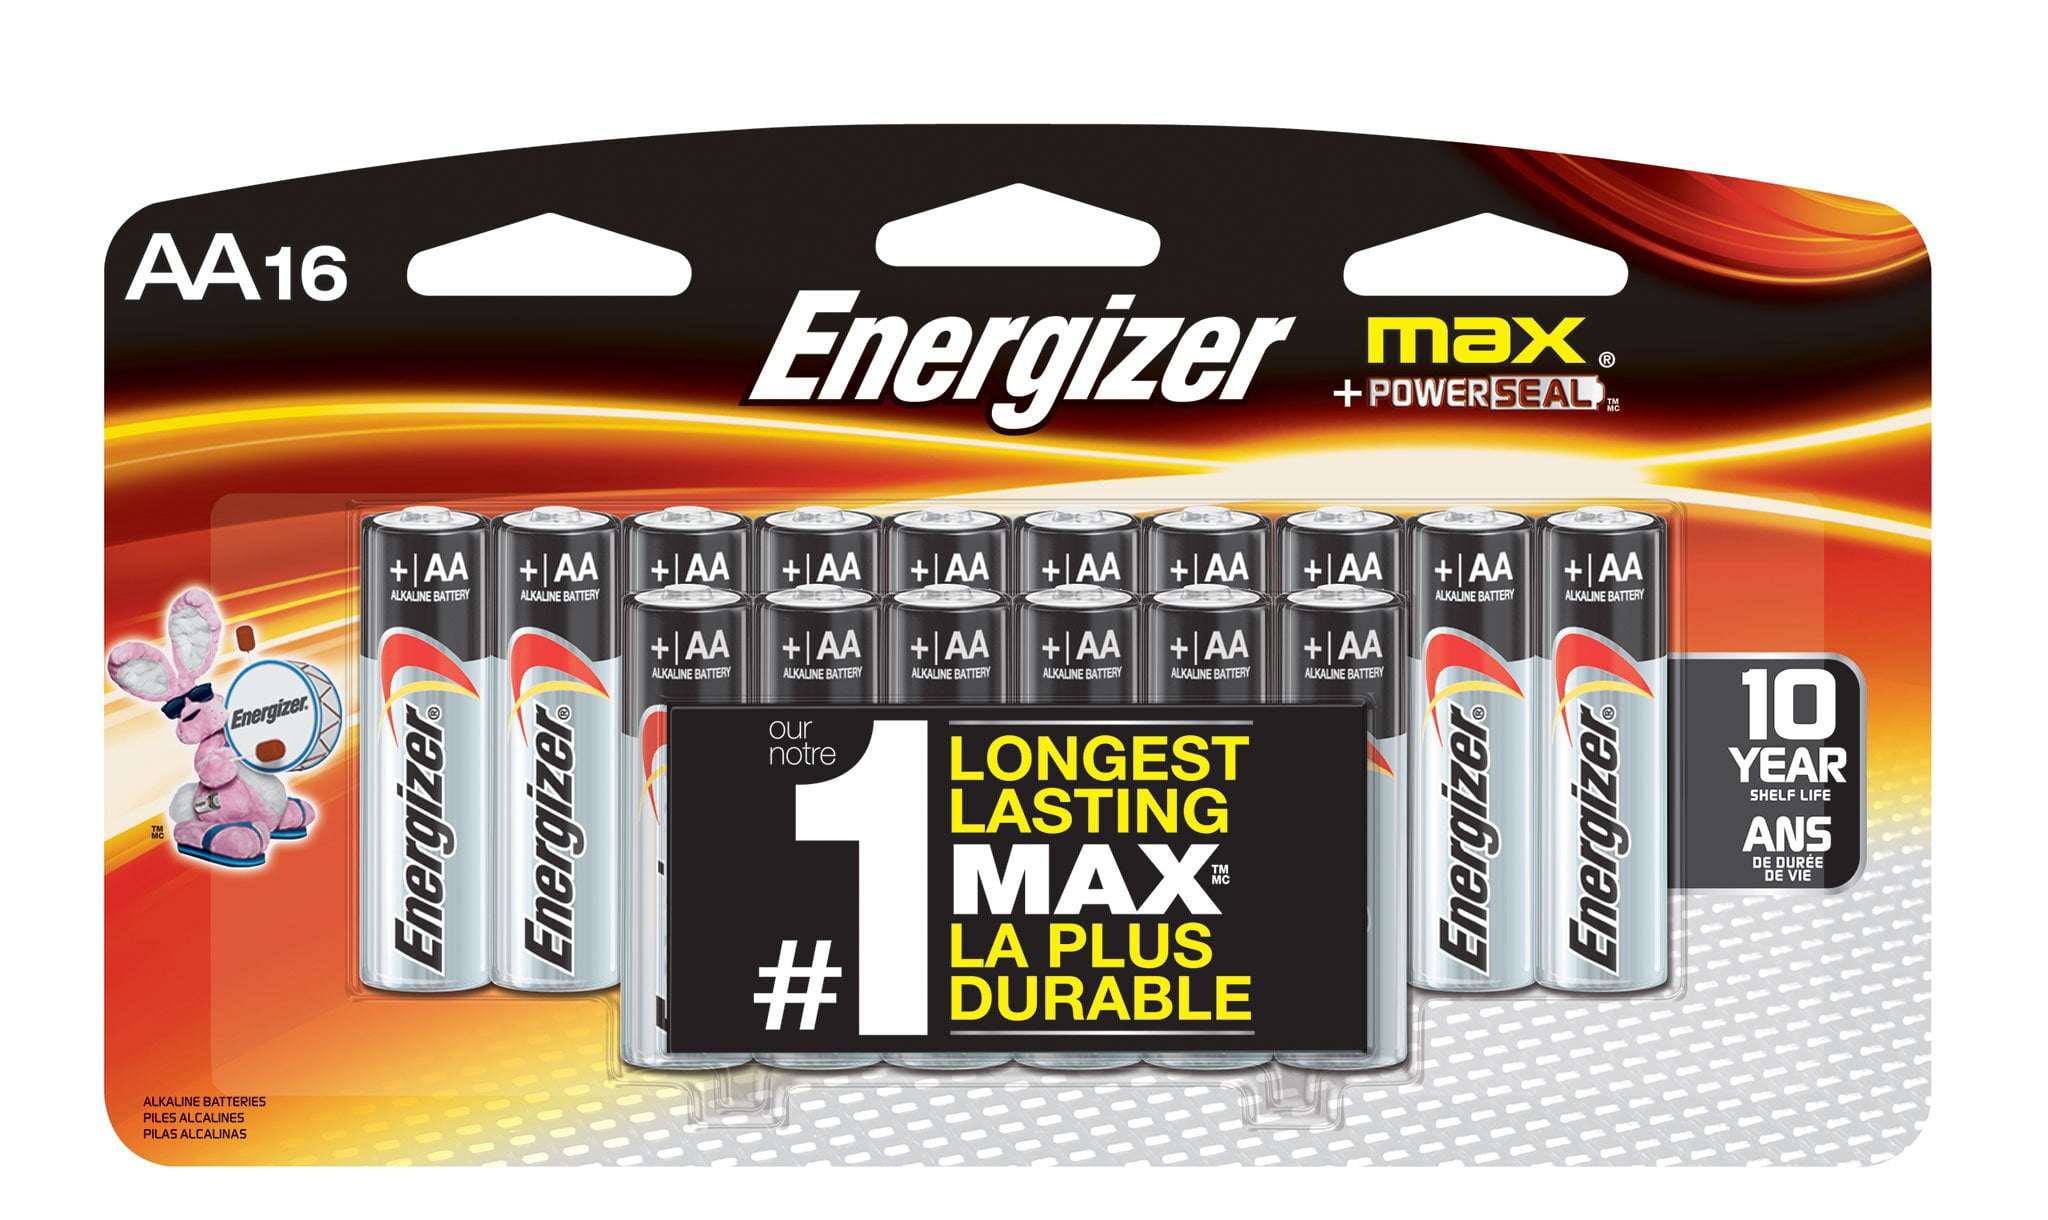 Battery last. Energizer Max АА. Energizer Max Plus. Alkaline Battery Energizer AA 2004. Energizer e242s.